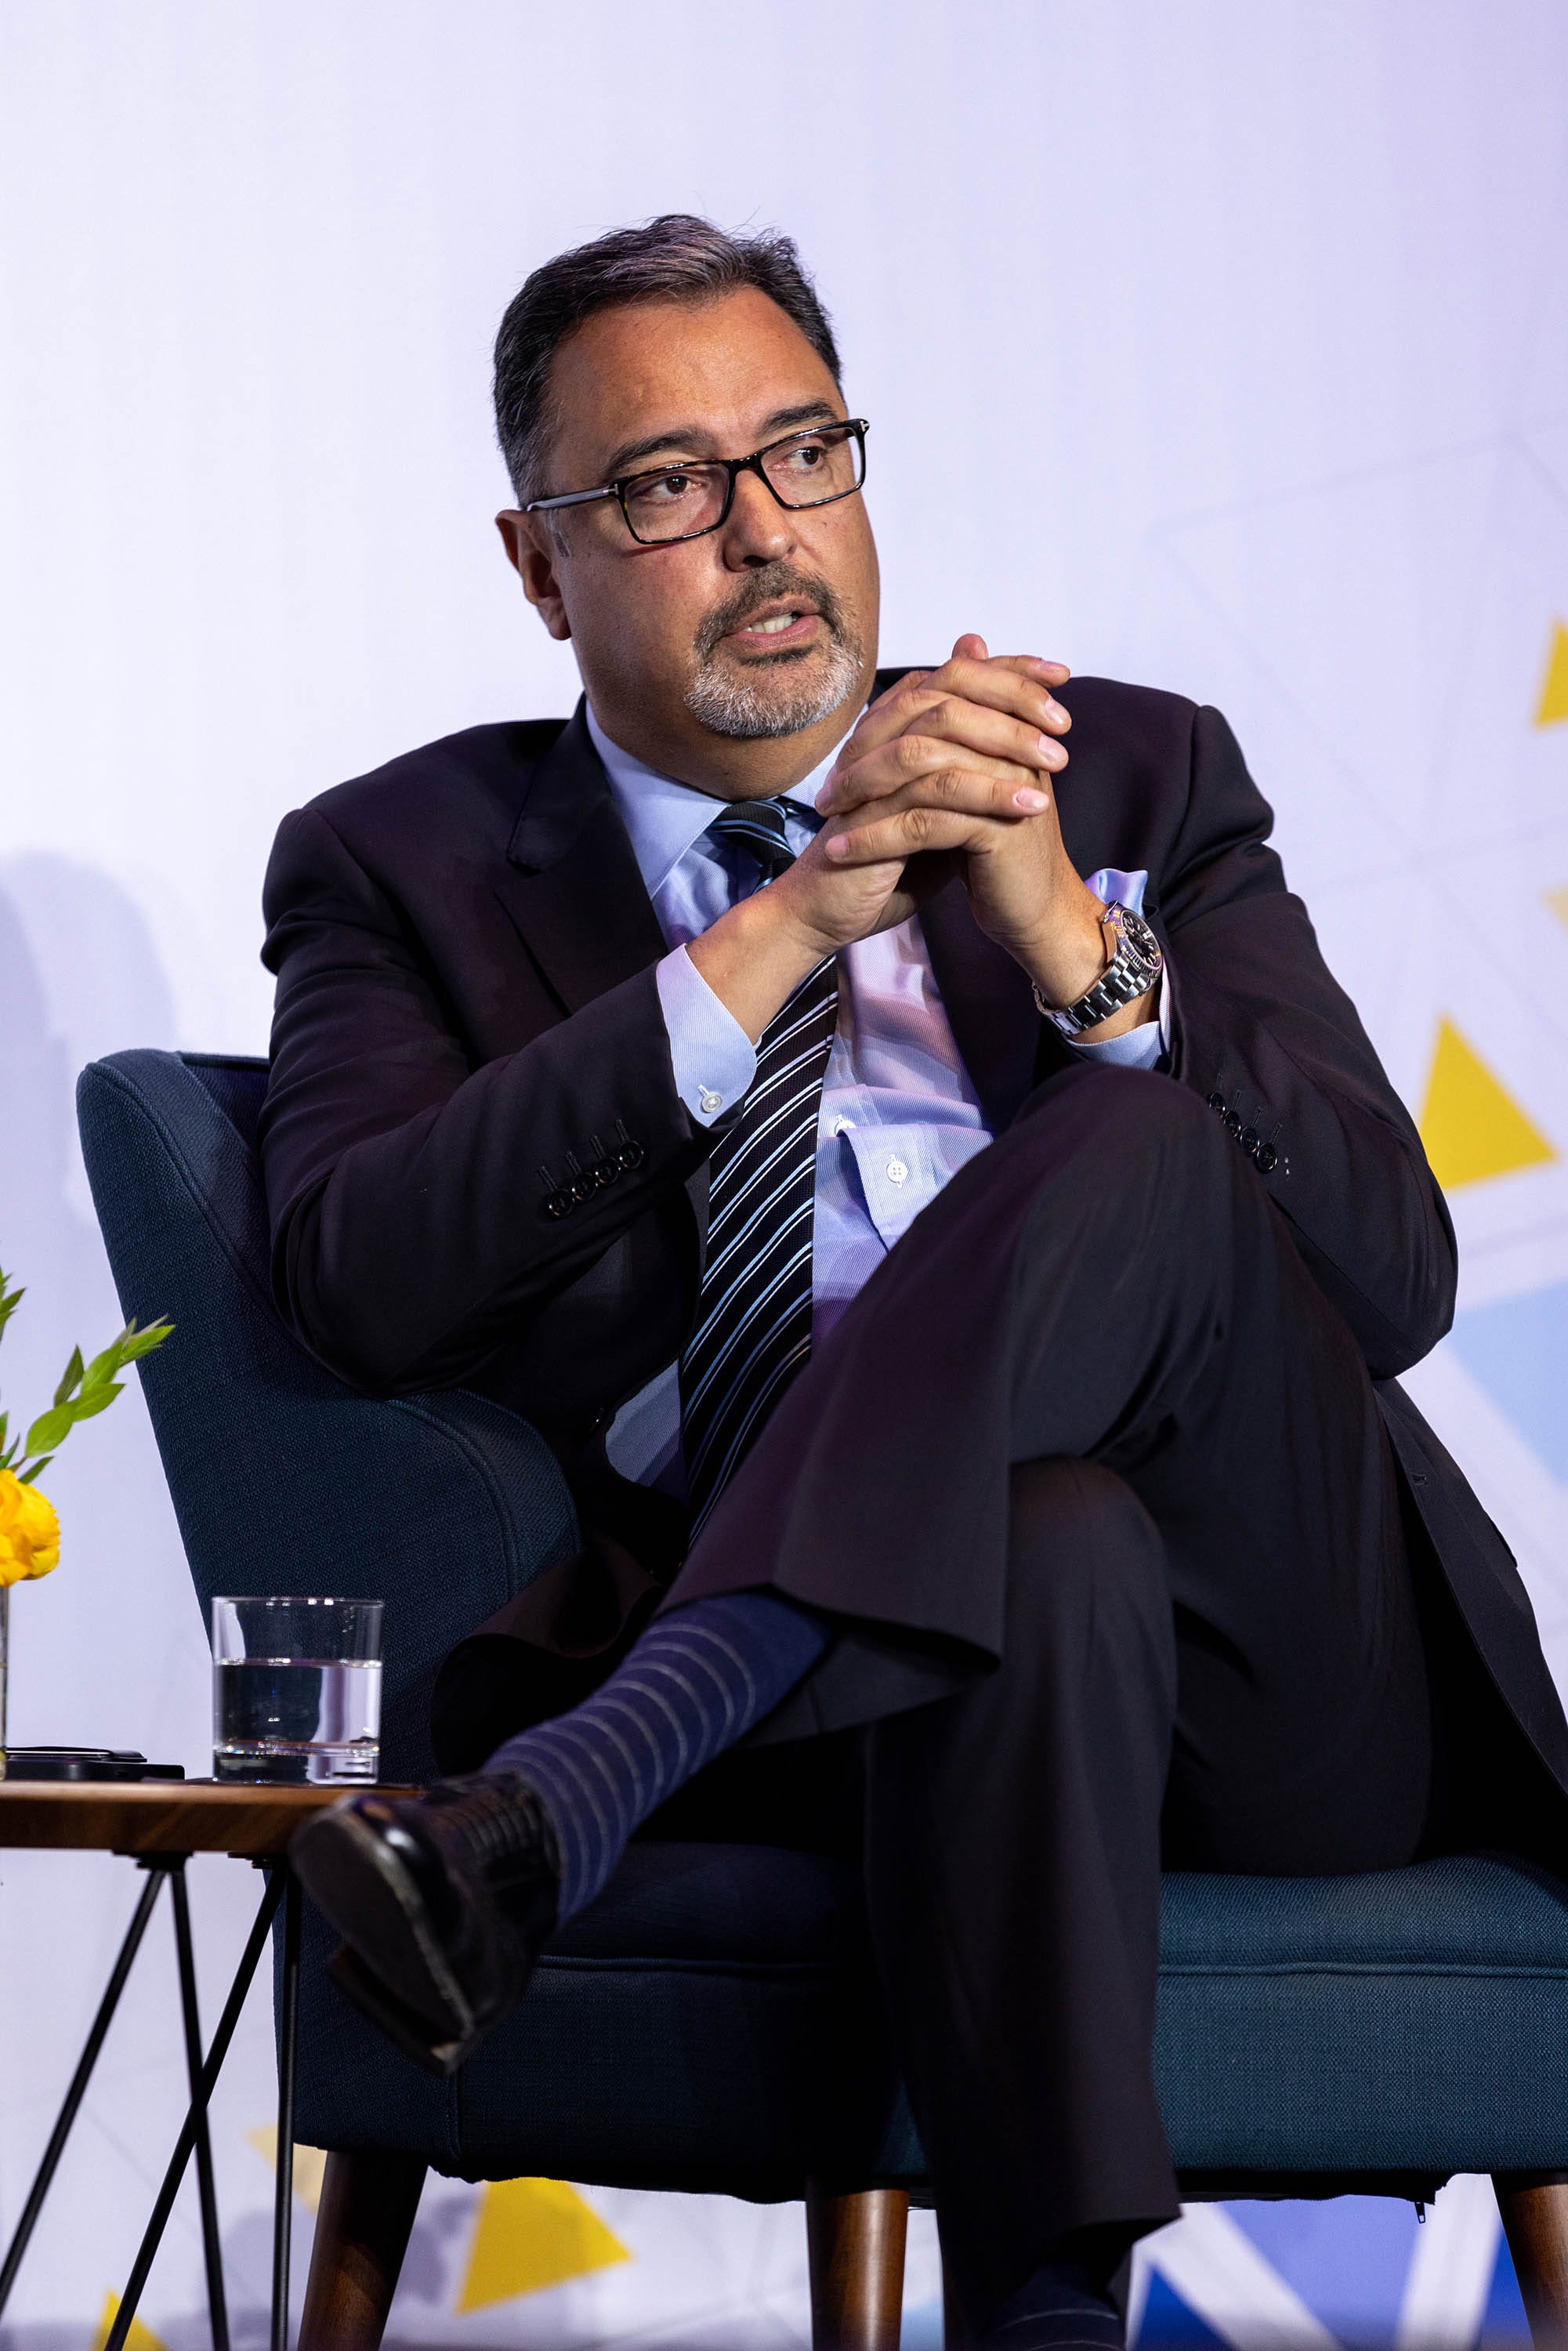 Michael Camuñez, board member at Edison International and president and CEO of consulting firm Monarch Global Strategies attends an event for the Hispanic Association on Corporate Responsibility on June 15, 2022.